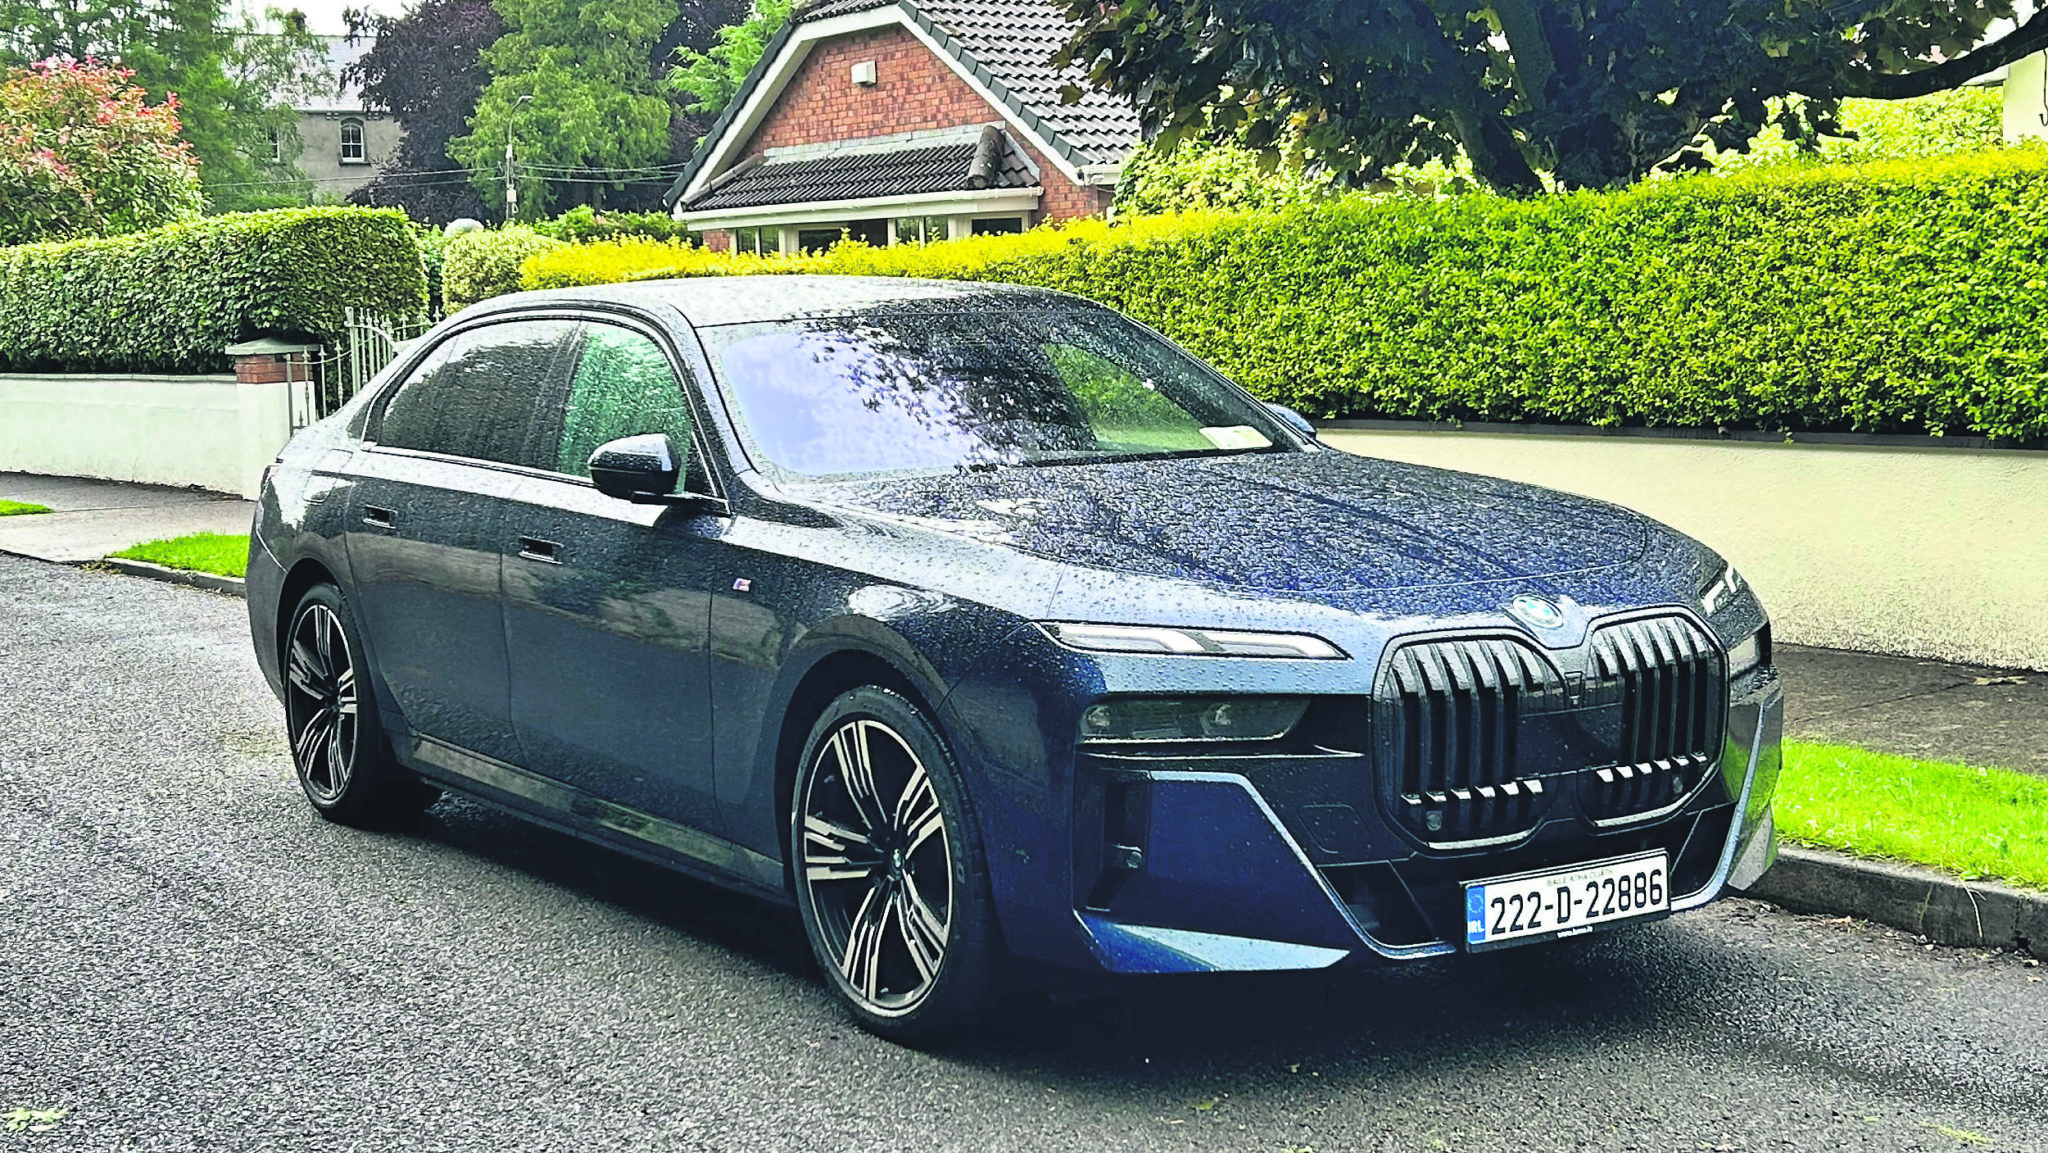 CAR OF THE WEEK: BMW i7 surges through electric saloon space